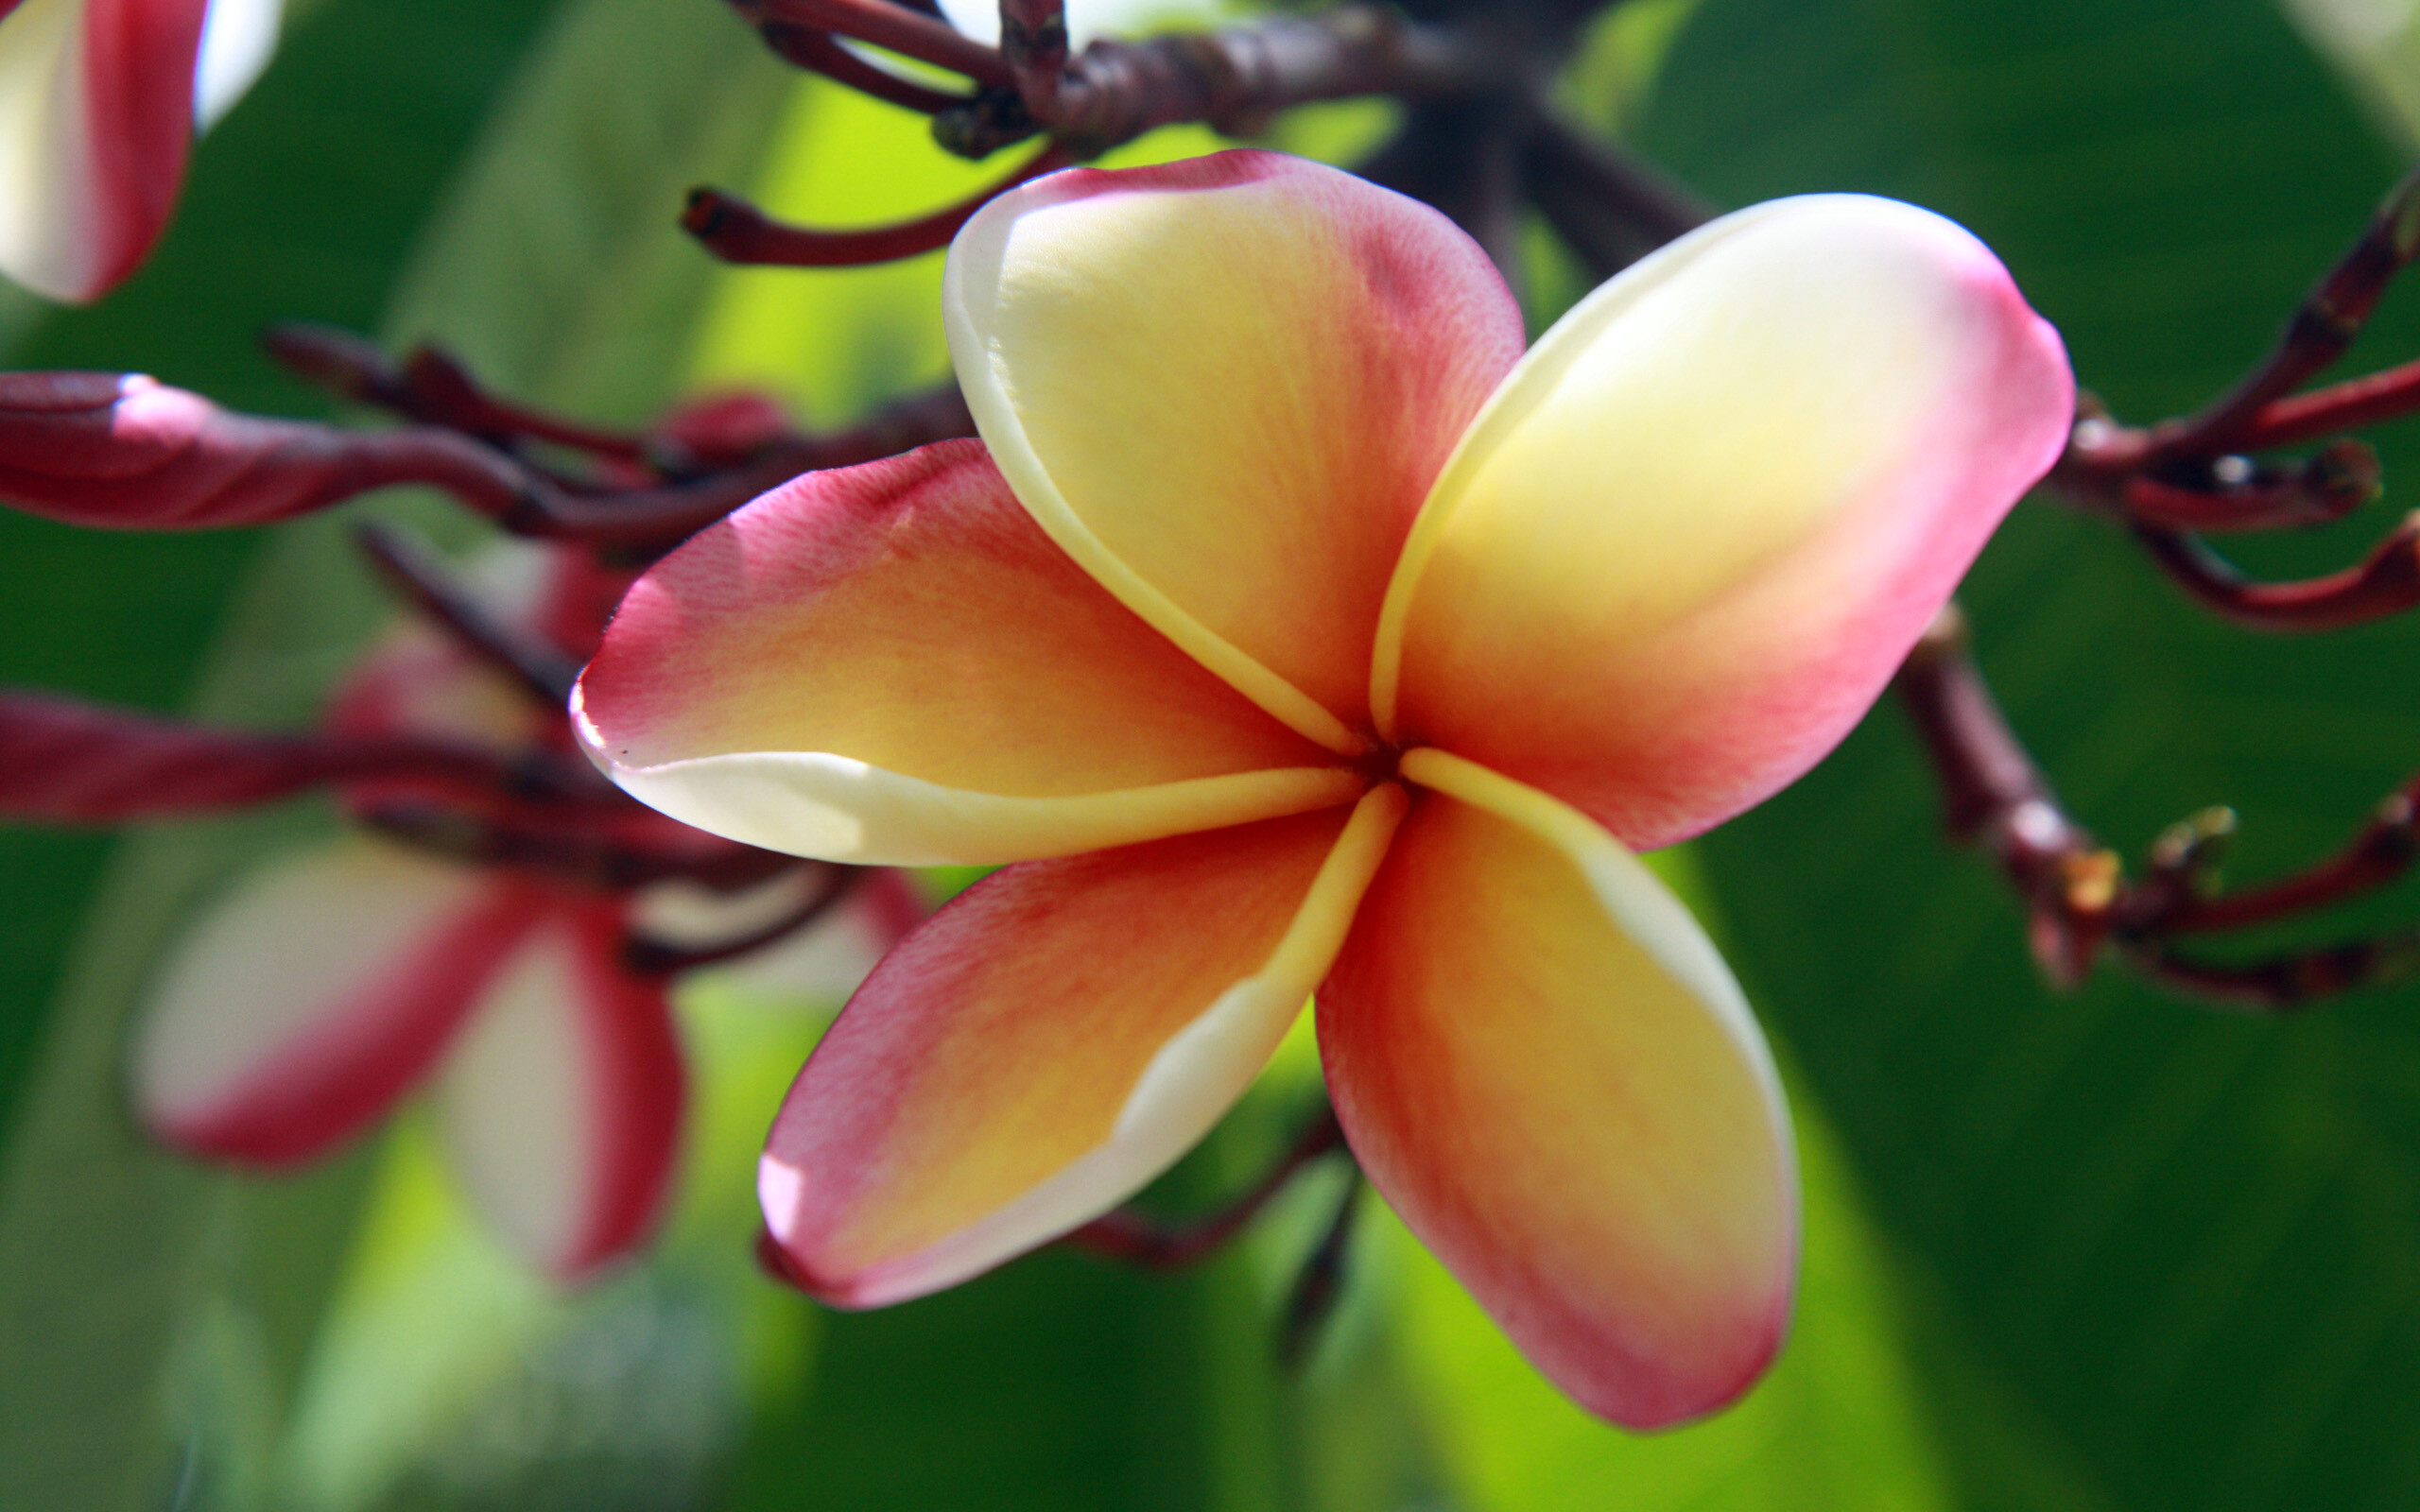 Frangipani Flower: The leaves of P. alba are narrow and corrugated, whereas the leaves of P. pudica have an elongated shape and glossy, dark-green color. 2560x1600 HD Wallpaper.